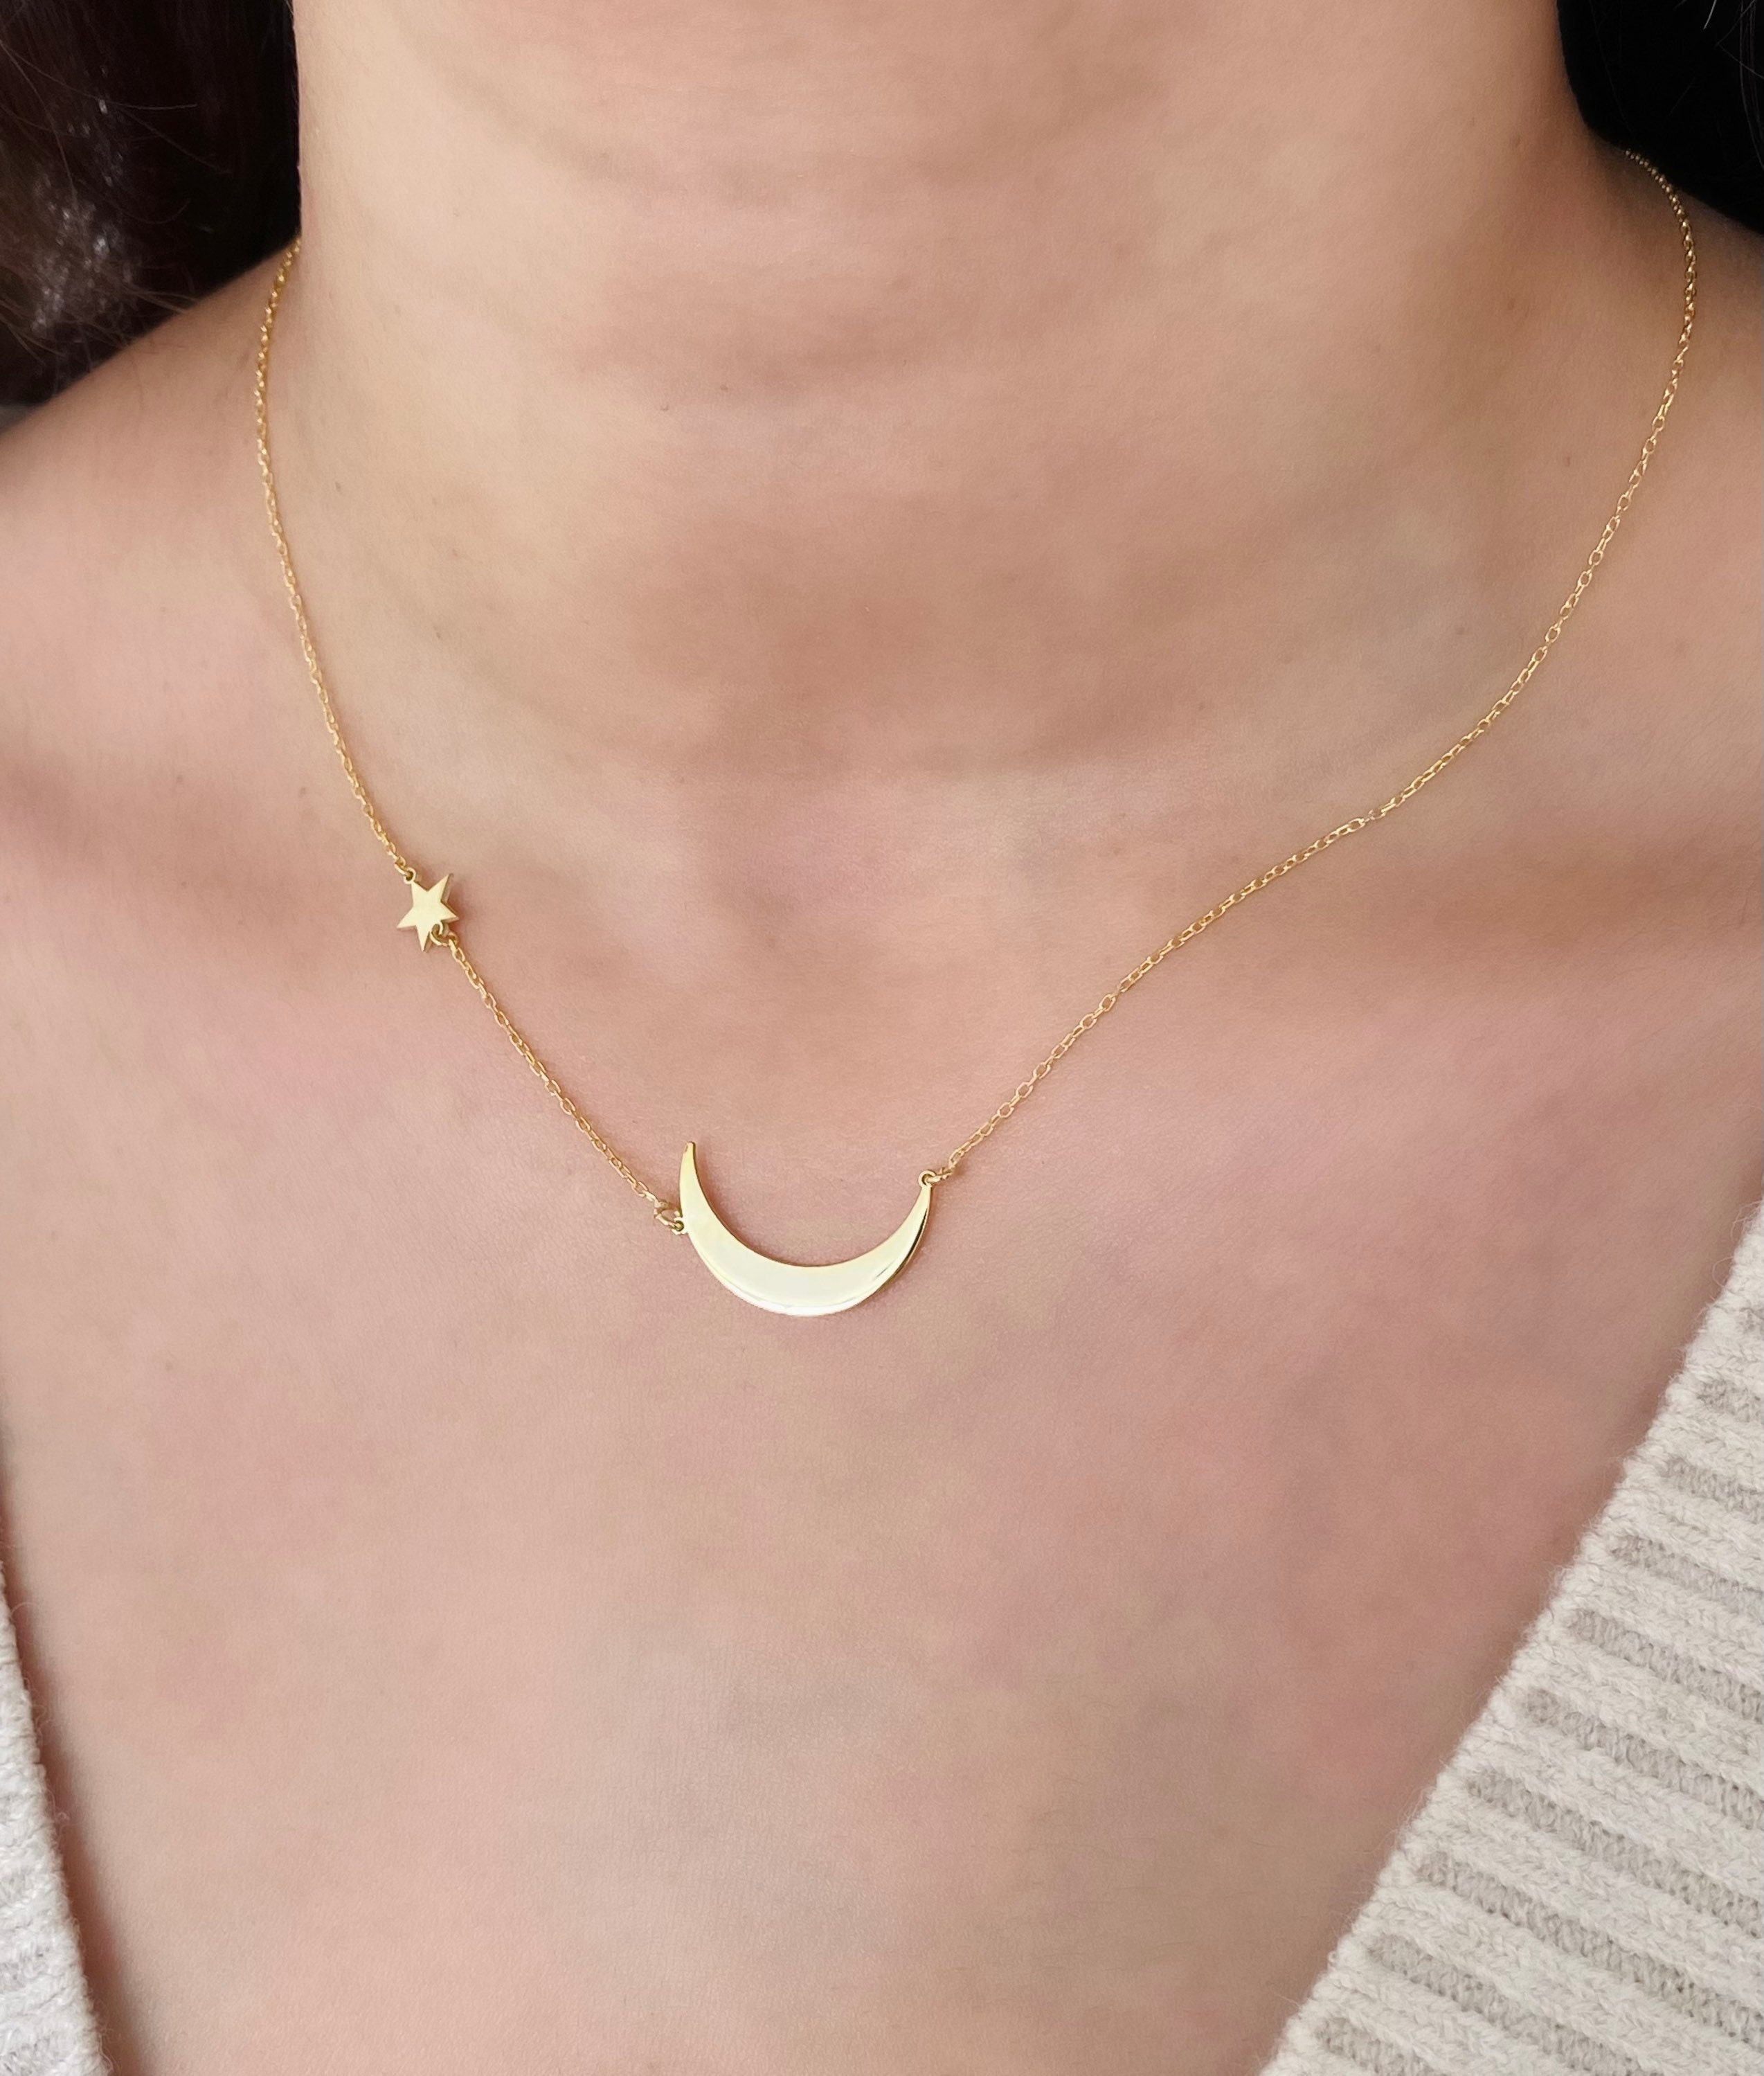 Buy 14K Gold Moon and Star Pendant on 14K Gold Chain. Online in India - Etsy